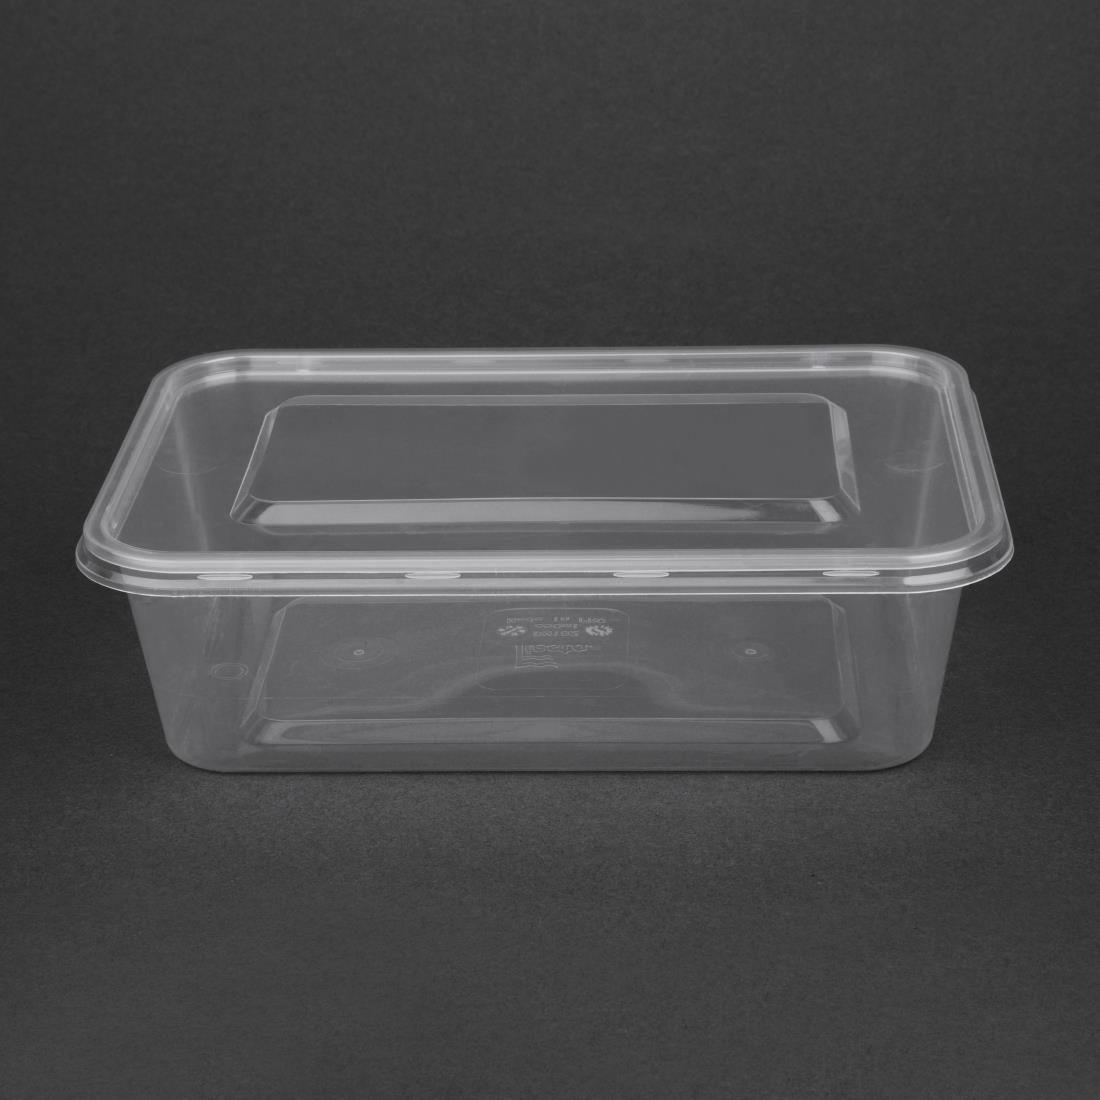 Fiesta Recyclable Plastic Microwavable Containers with Lid Medium 650ml (Pack of 250) - DM182  - 3